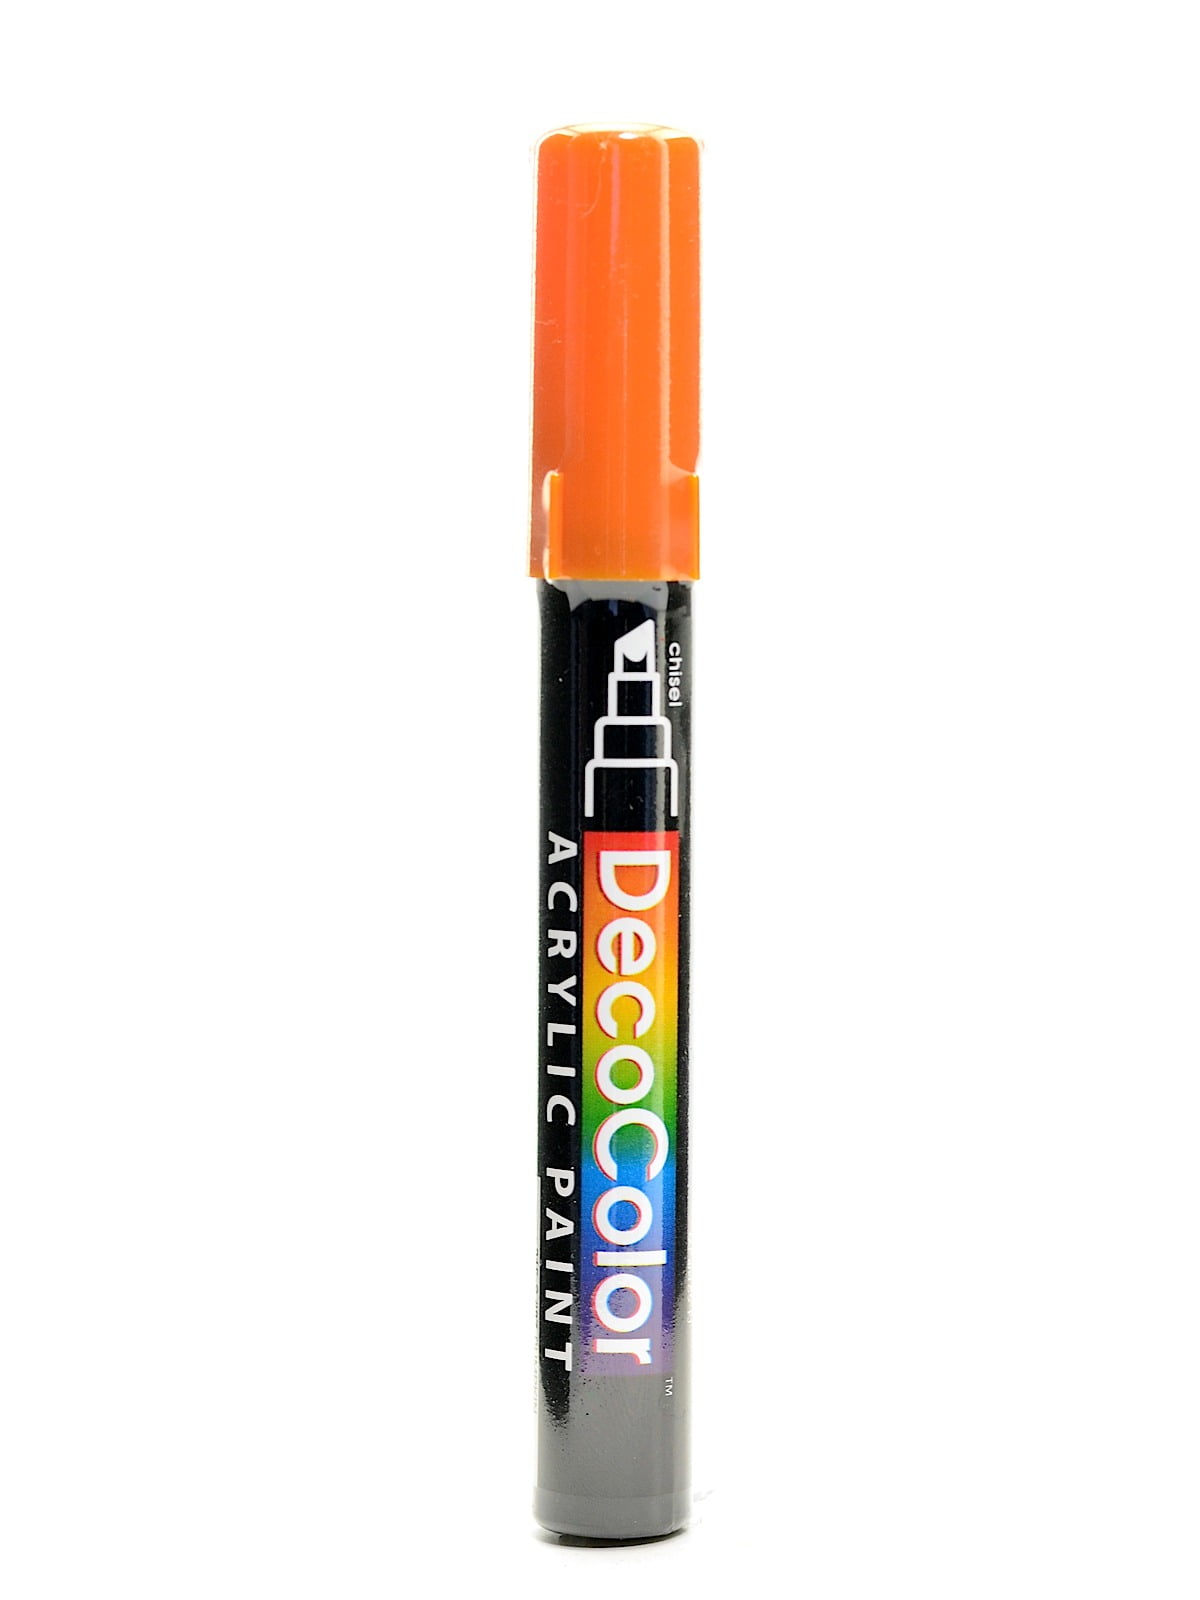 Bigthumb 36 Colors Paint Pens Oil-Based Paint Marker Set Waterproof Quick Dry for Rocks Painting